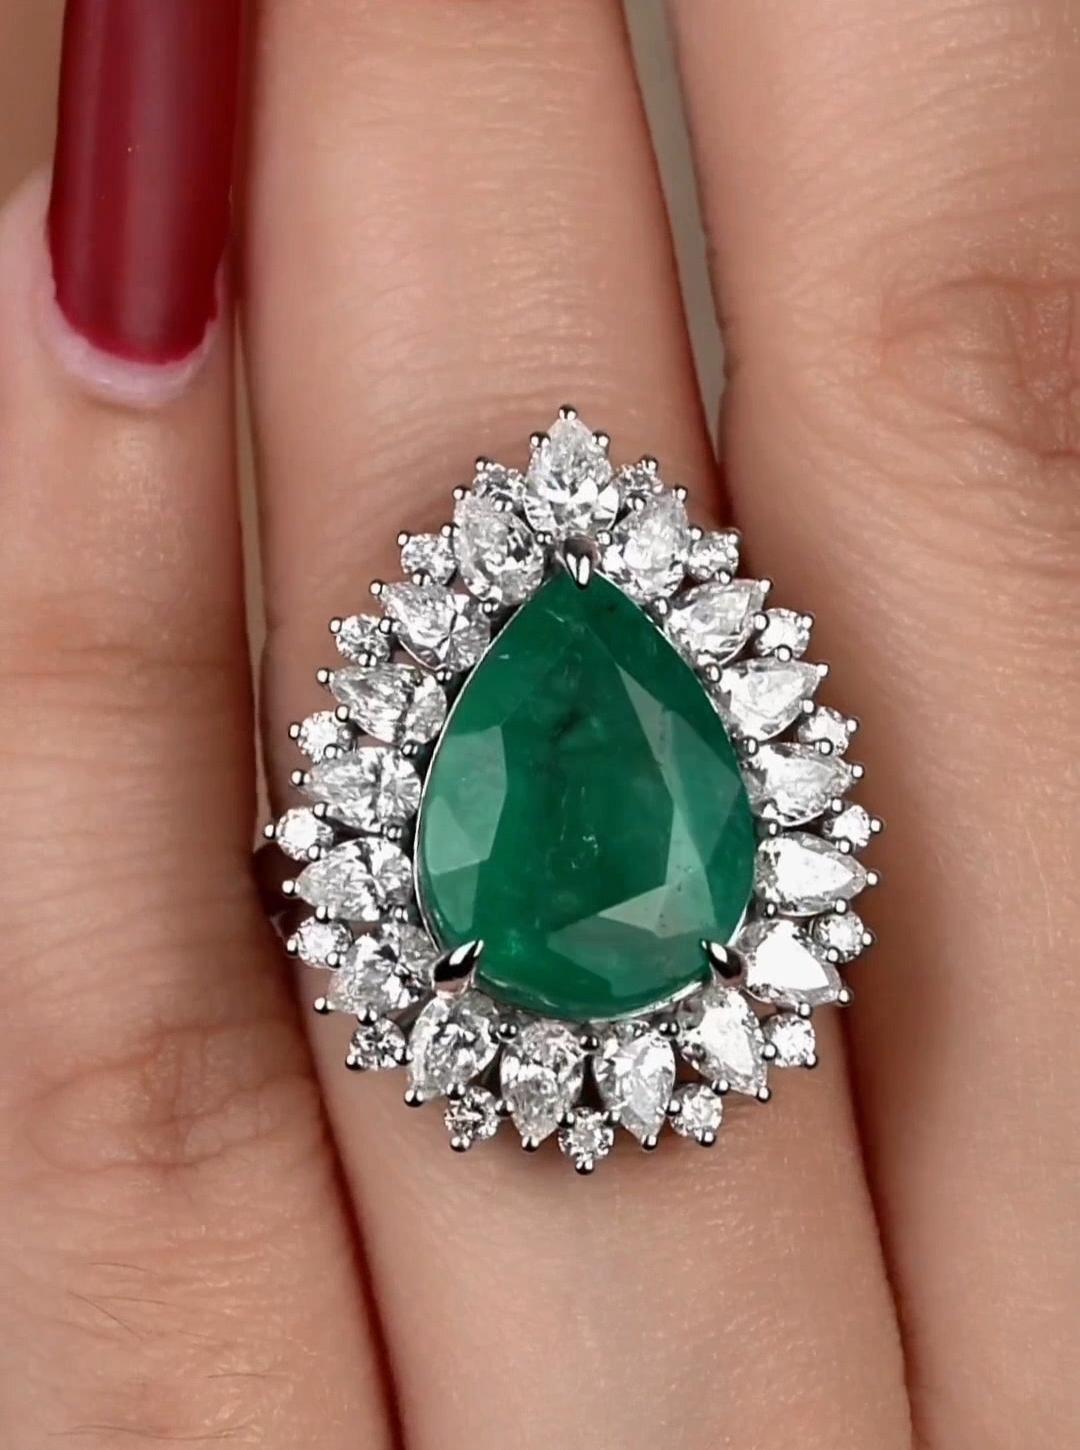 The Following Item we are offering is a Rare Important Radiant 18KT Gold Large Fancy Glittering Emerald and Diamond Ring. Ring is comprised of A LARGE Gorgeous Pear Shaped Fancy Emerald sitting atop Beautiful Glittering Fancy Glittering Round and